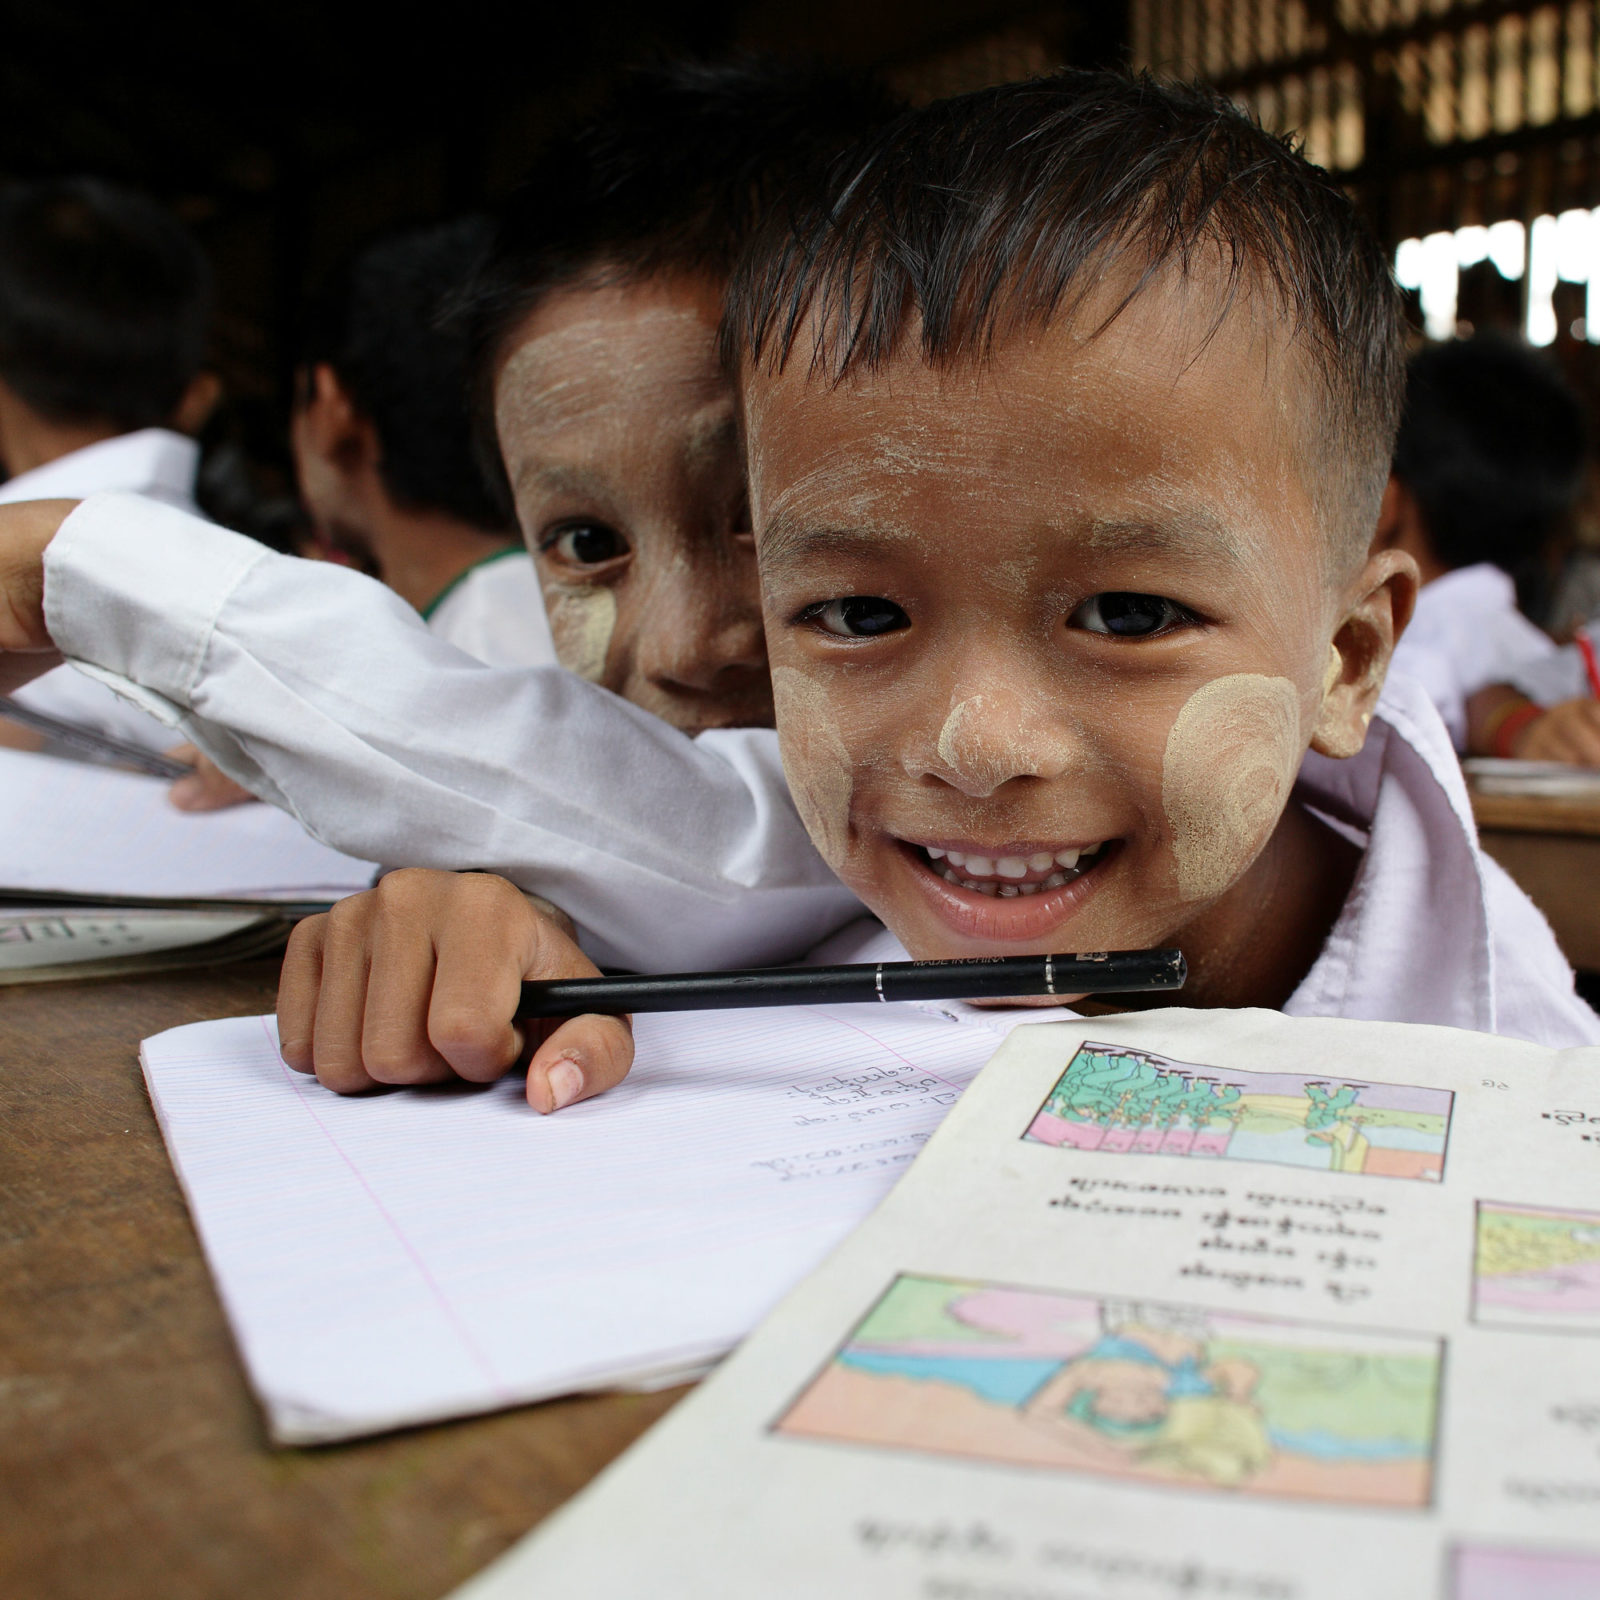 Close-up of smiling boy with, in Myanmar, traditional white markings on face, sitting in classroom, pen in hand.